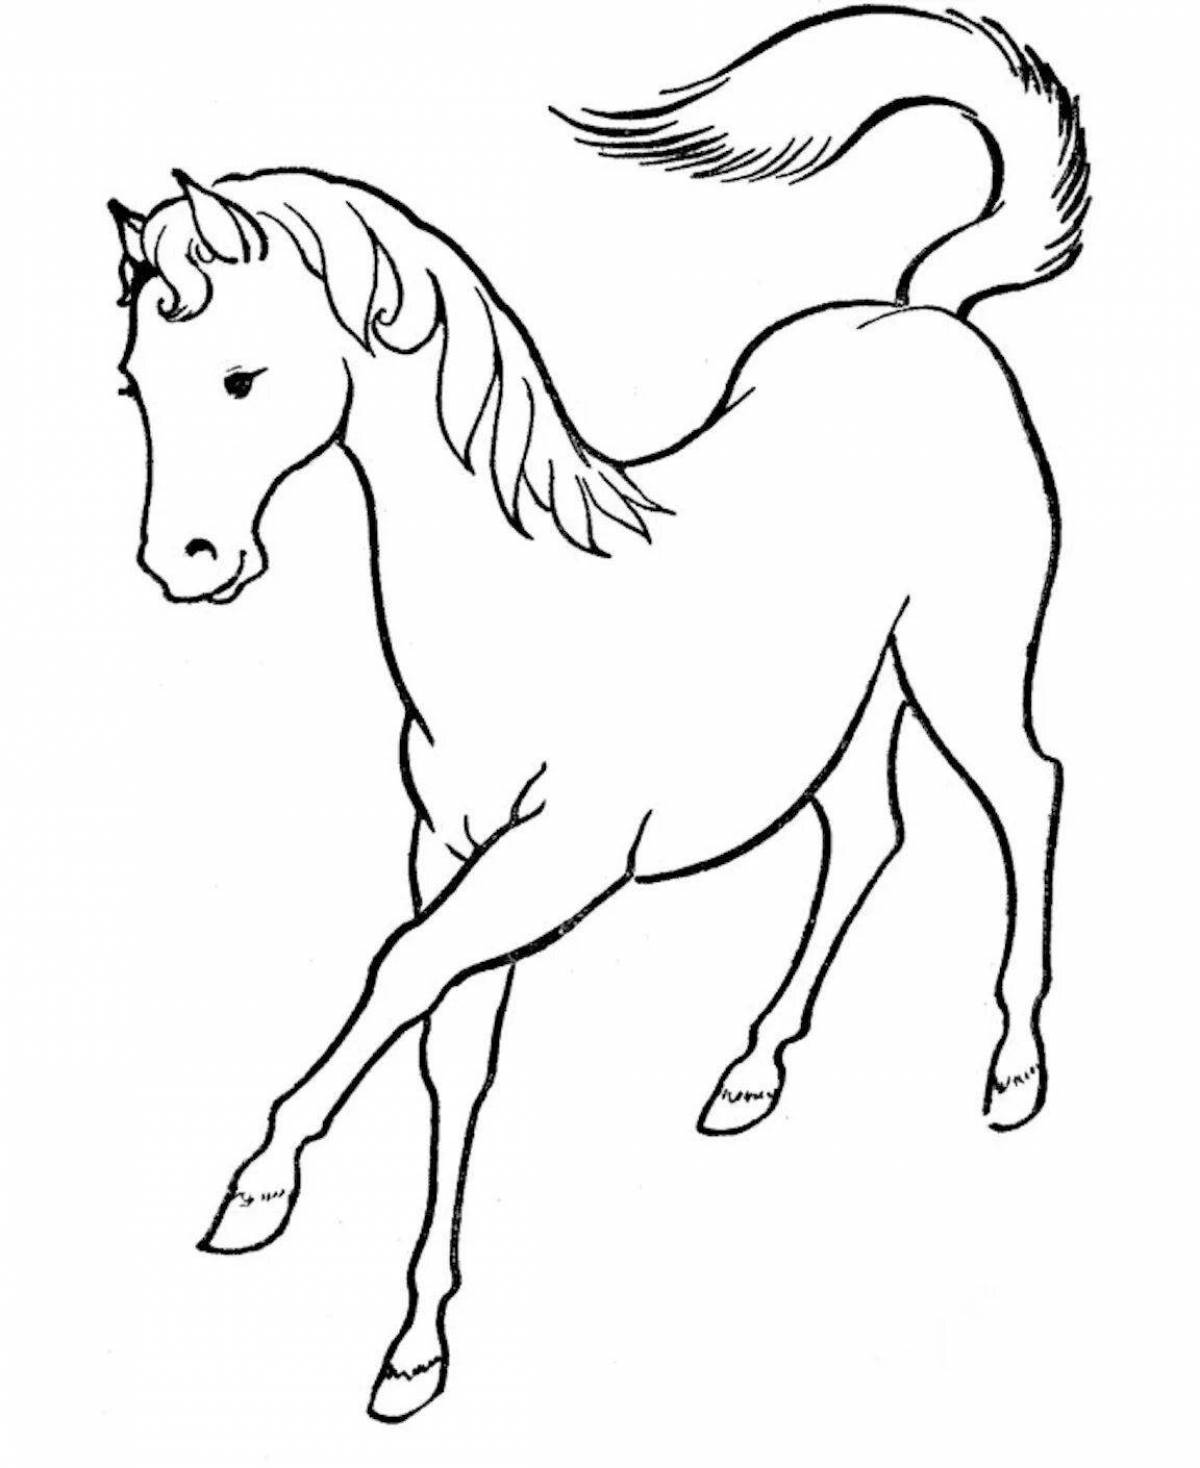 Shiny horse coloring pages